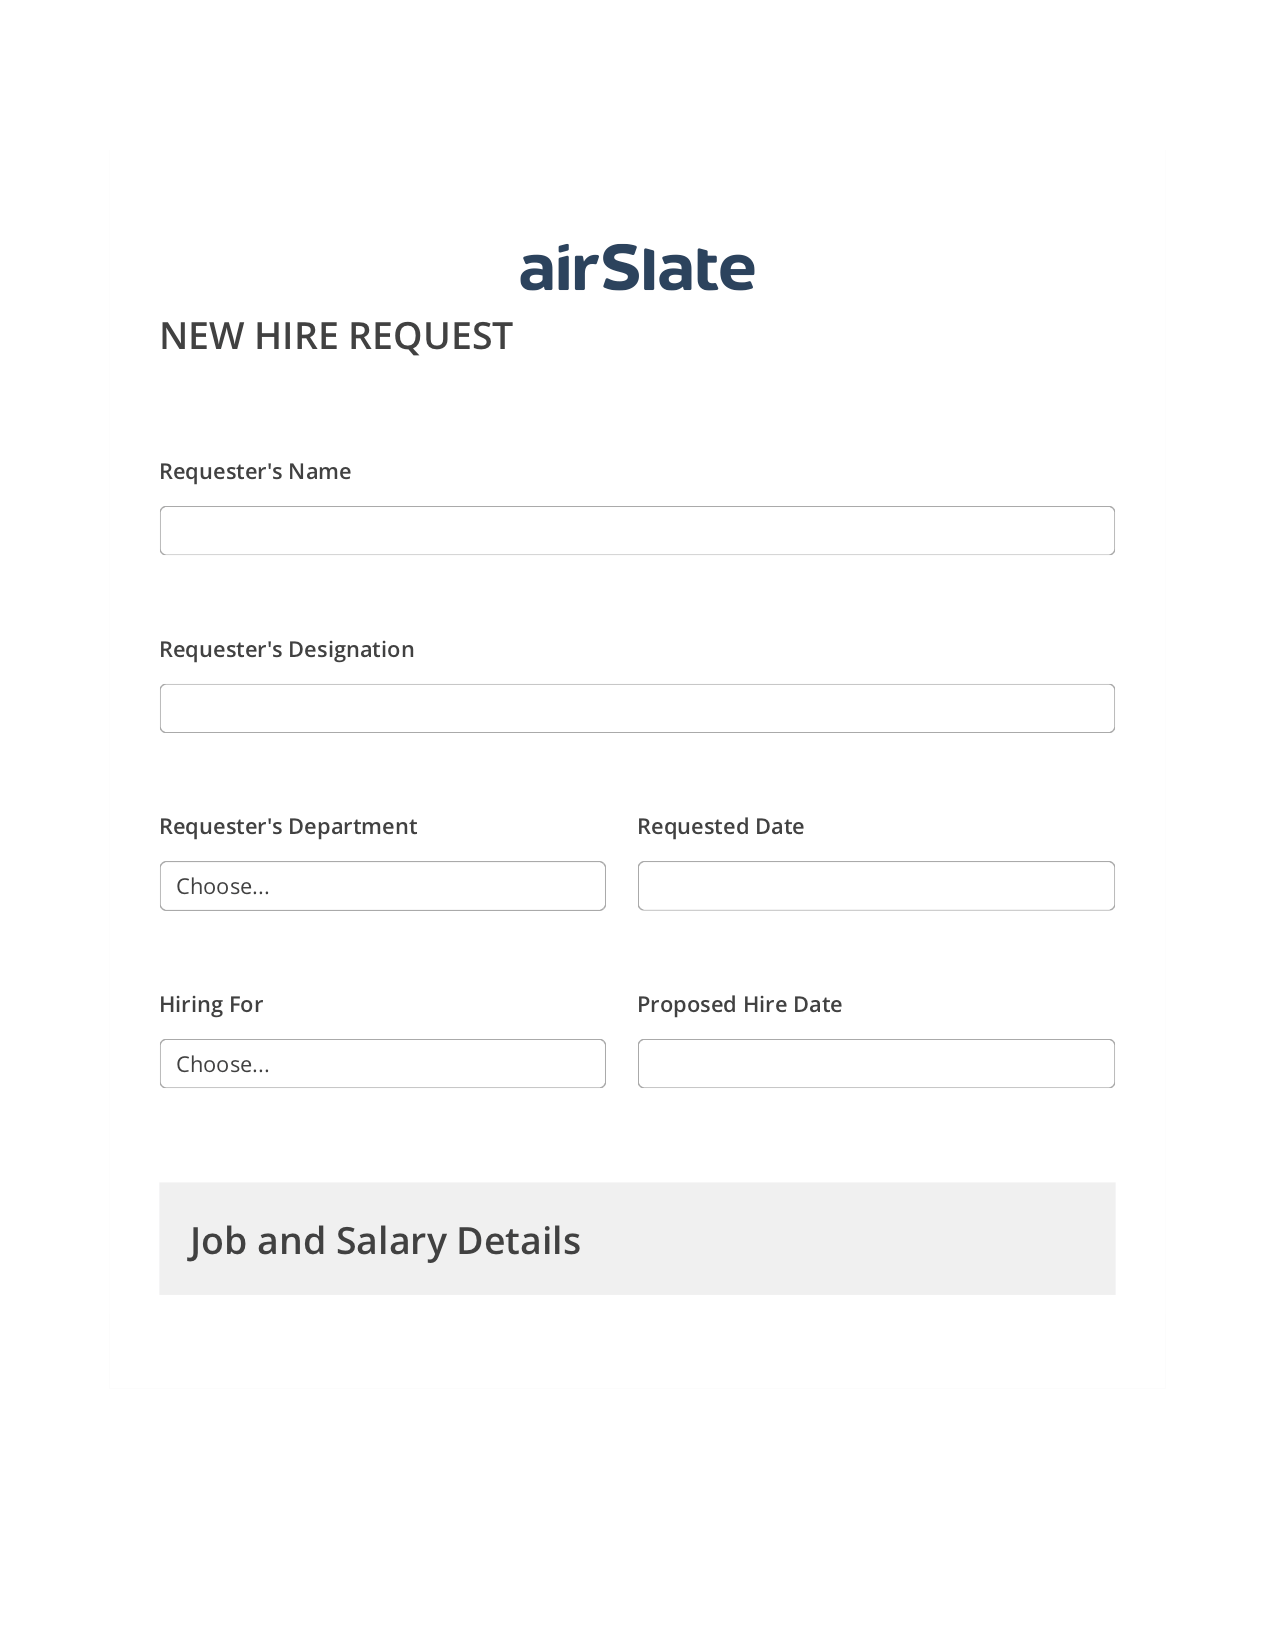 Hiring Request Workflow Prefill from NetSuite records, Webhook Bot, Archive to SharePoint Folder Bot